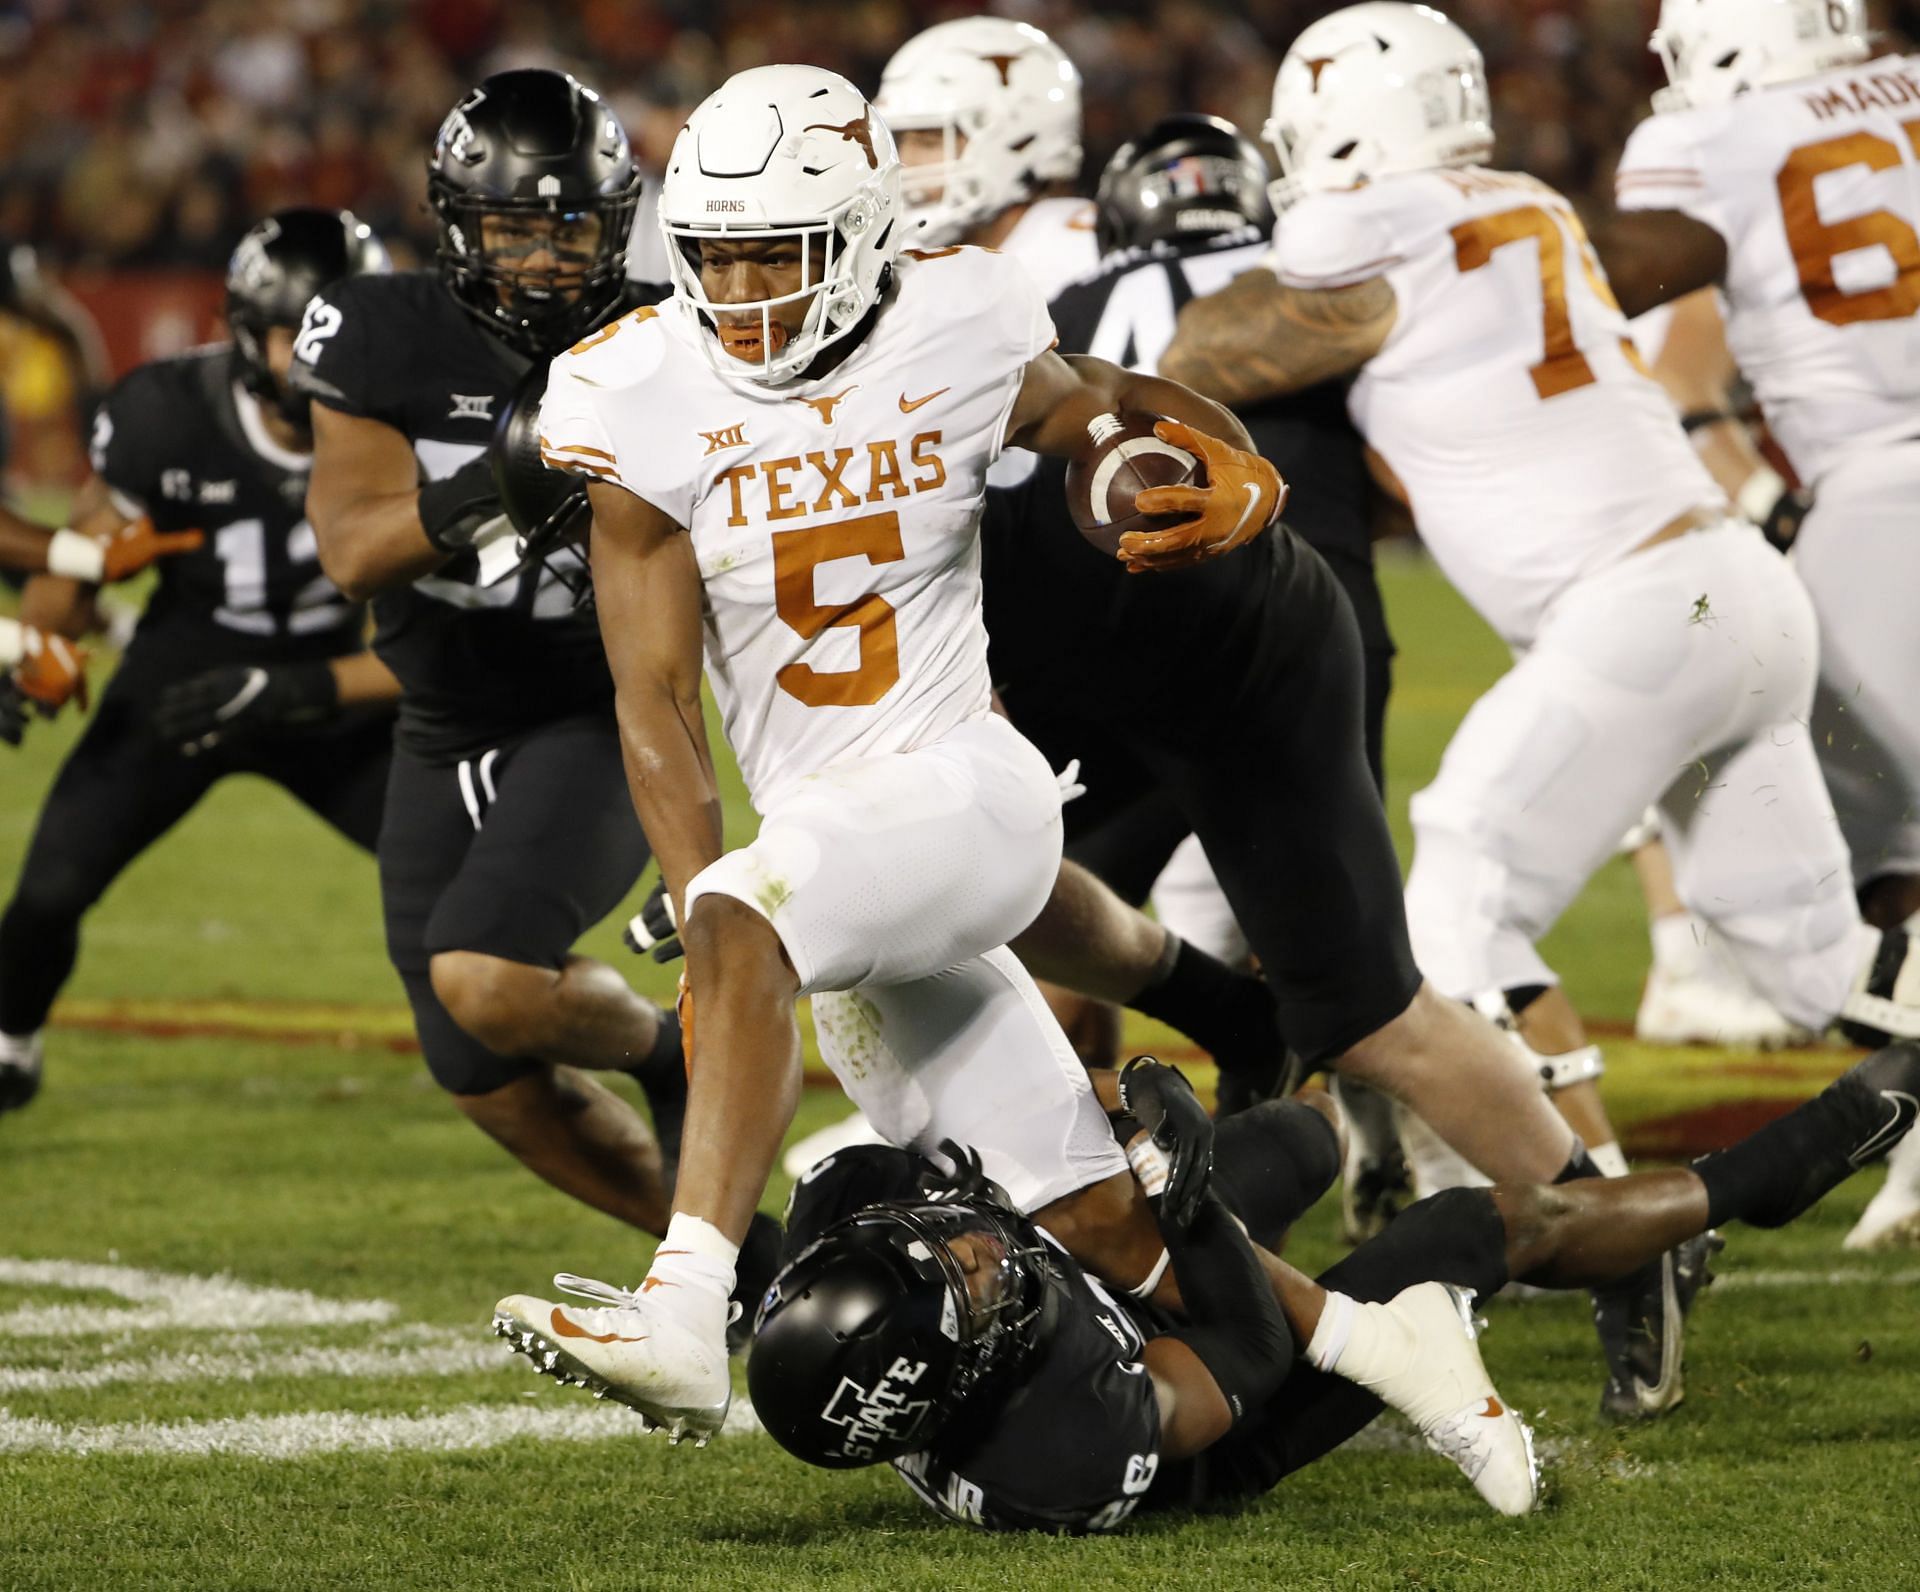 Running back Bijan Robinson #5 of the Texas Longhorns is tackled by defensive back Anthony Johnson Jr. #26